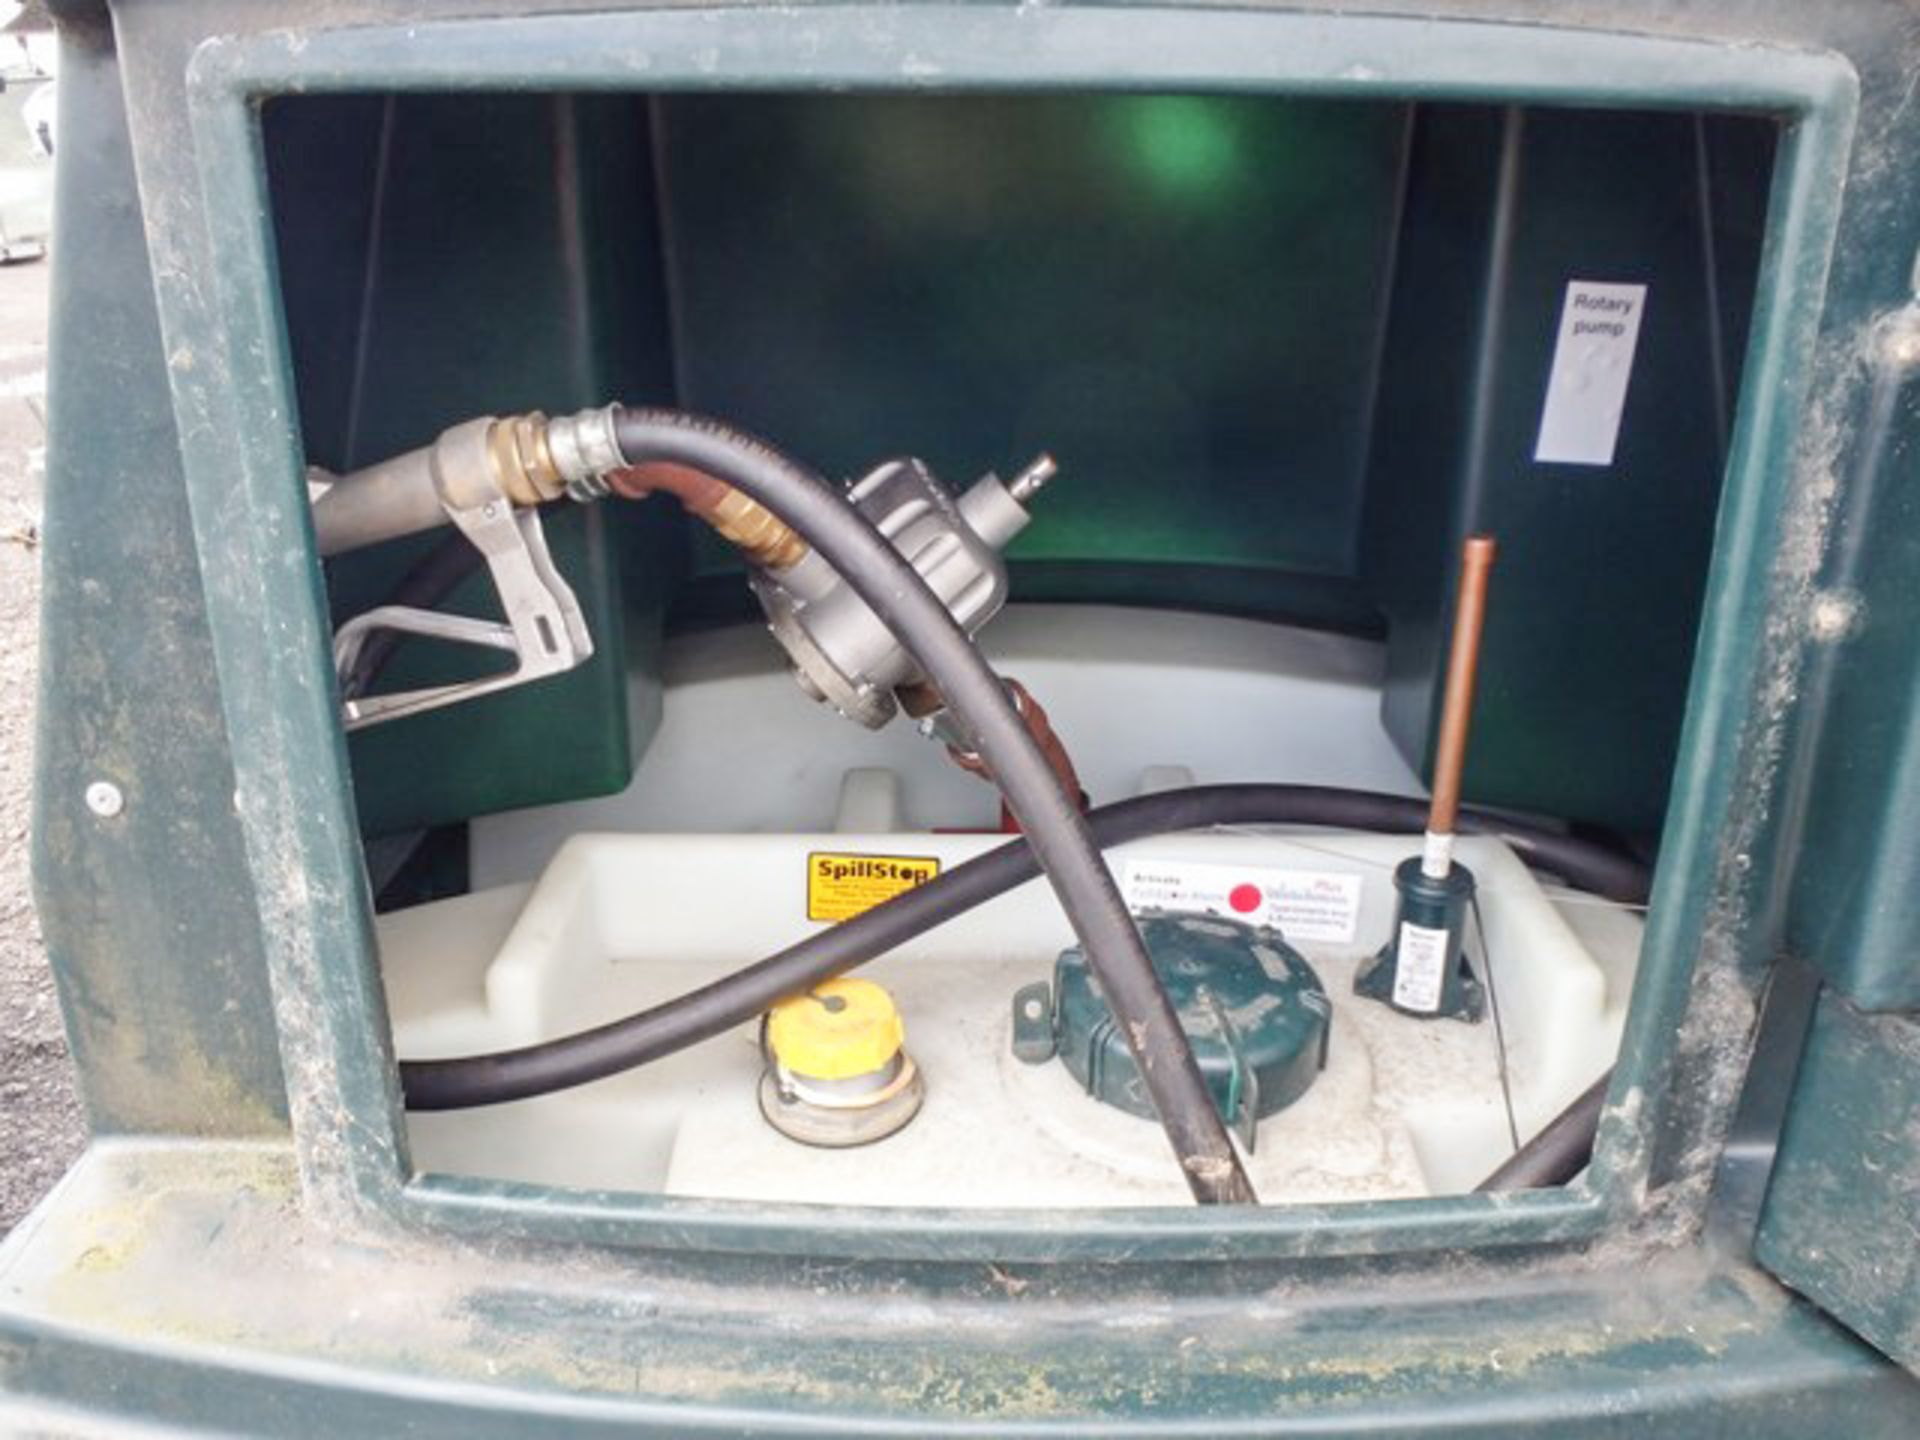 TITAN FM1300 BUNDED FUEL TANK, 286 GALLON CAPACITY (APPROX), C/W ROTARY HAND PUMP, SPILL STOP OVERFL - Image 3 of 3